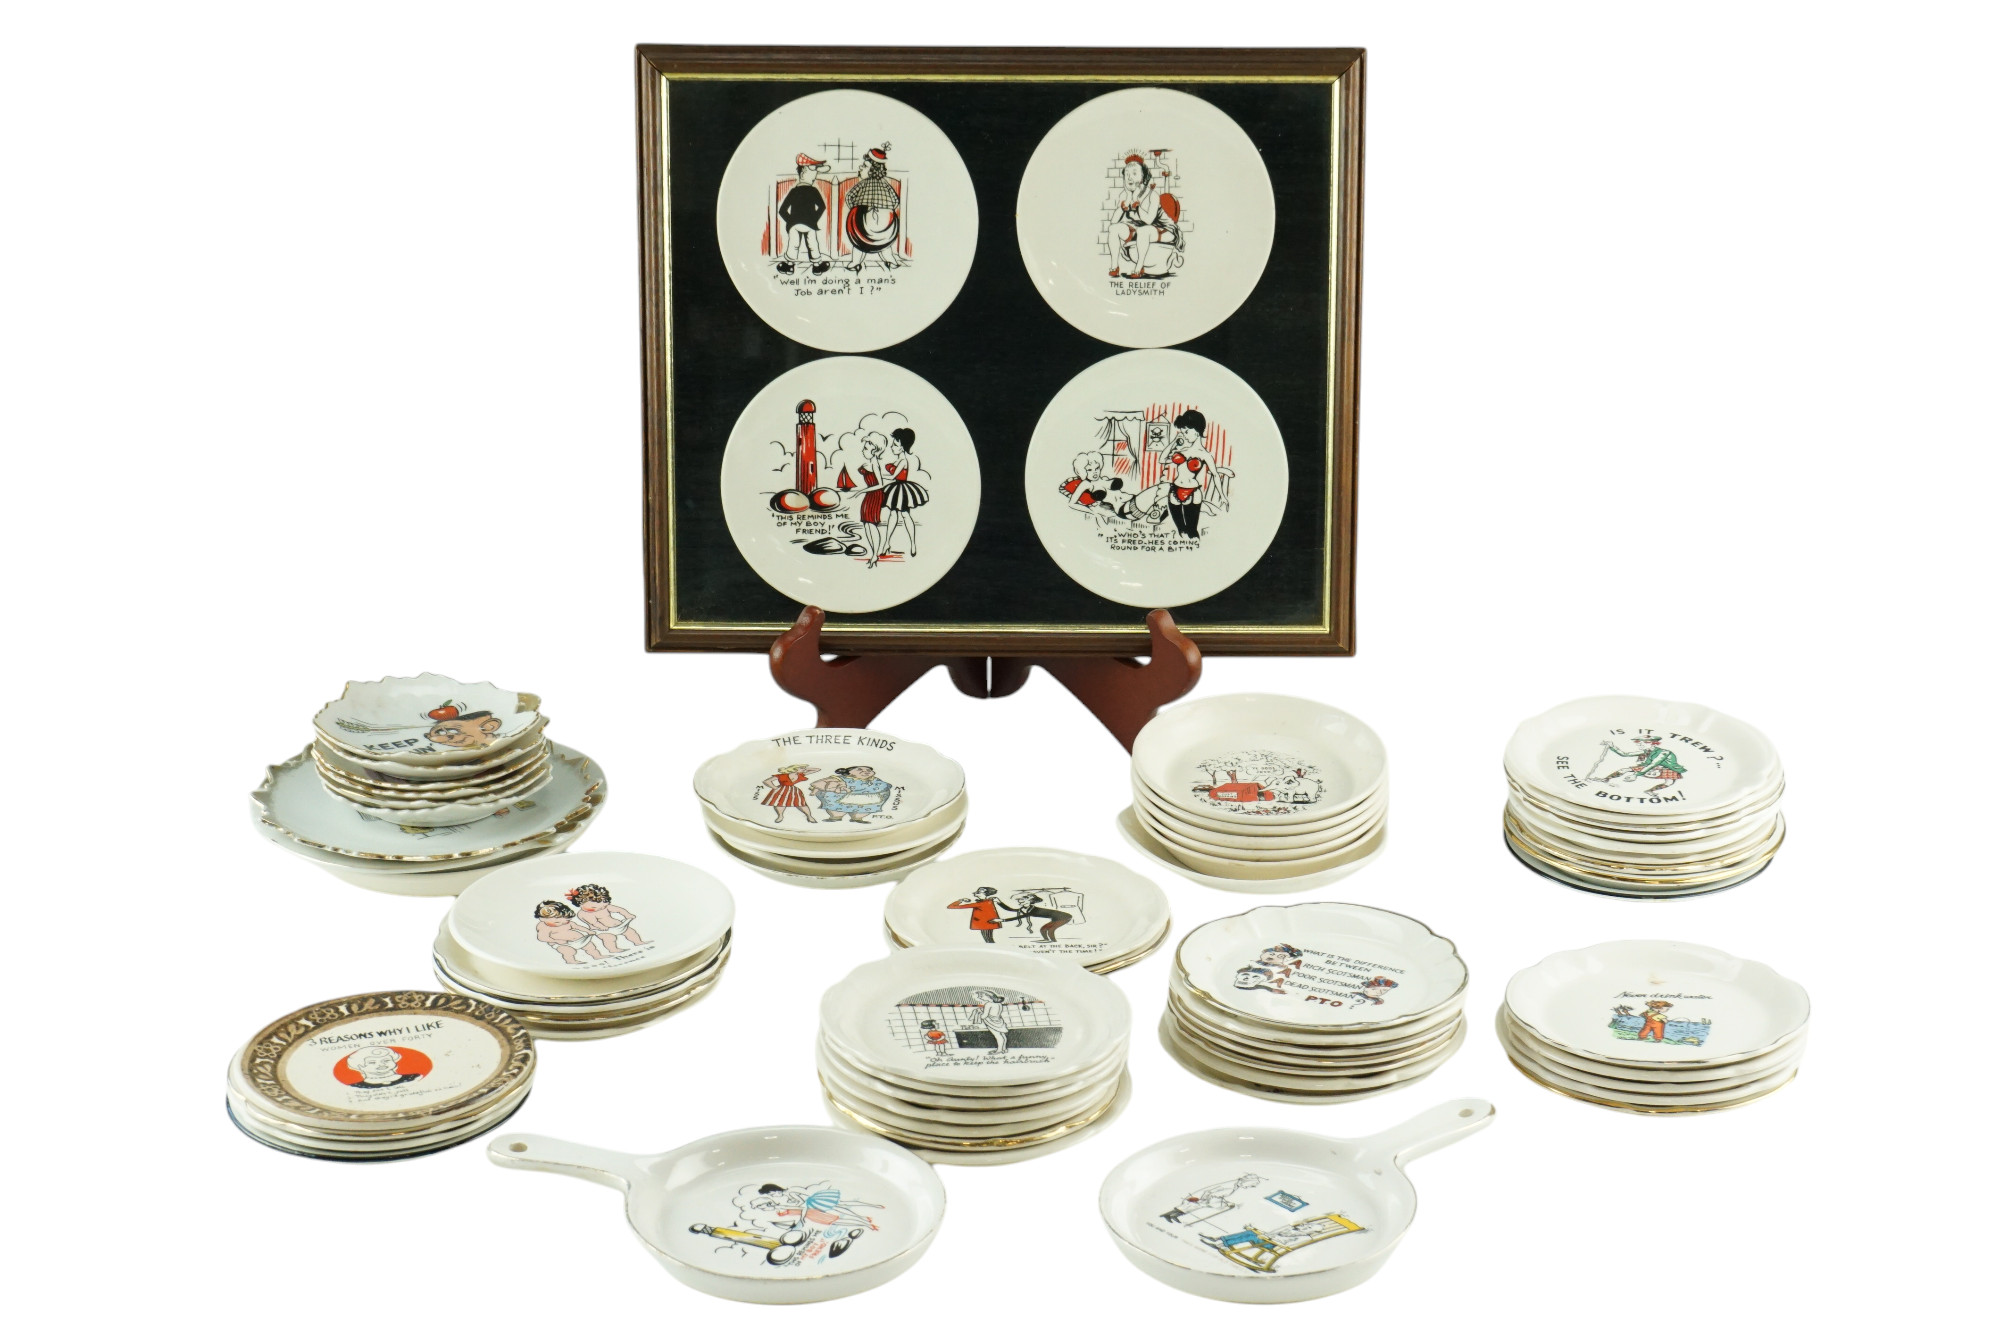 A collection of humorous and risqué earthenware pin dishes, by Liverpool Road Pottery, Bourne,